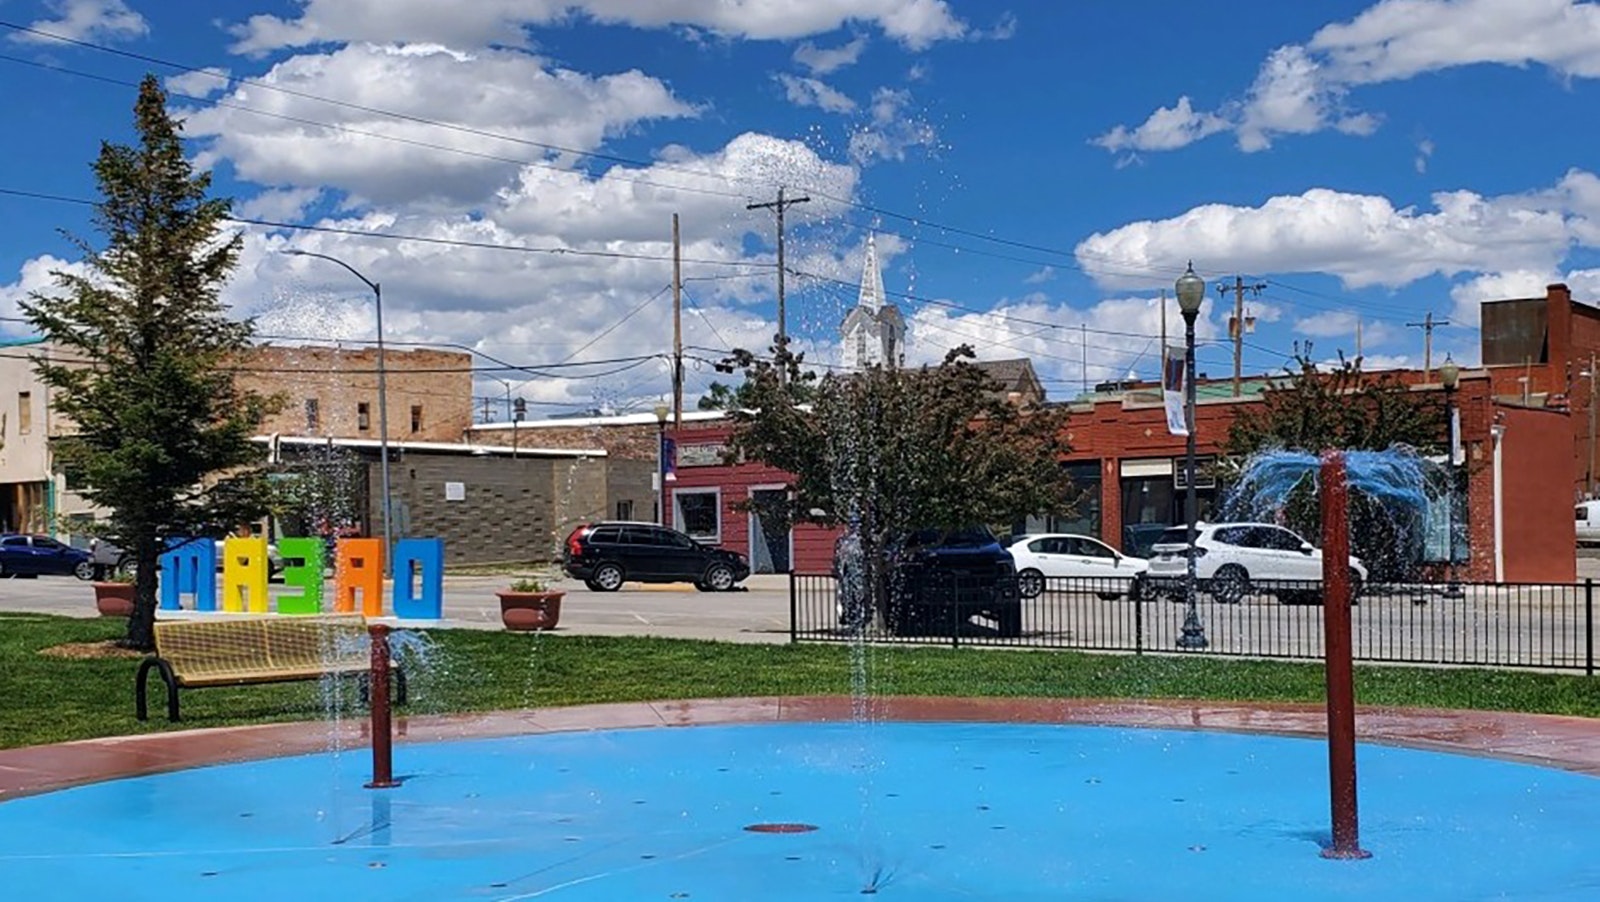 The new splash pad in Rawlins was delayed a couple years because of supply chain and other issues.